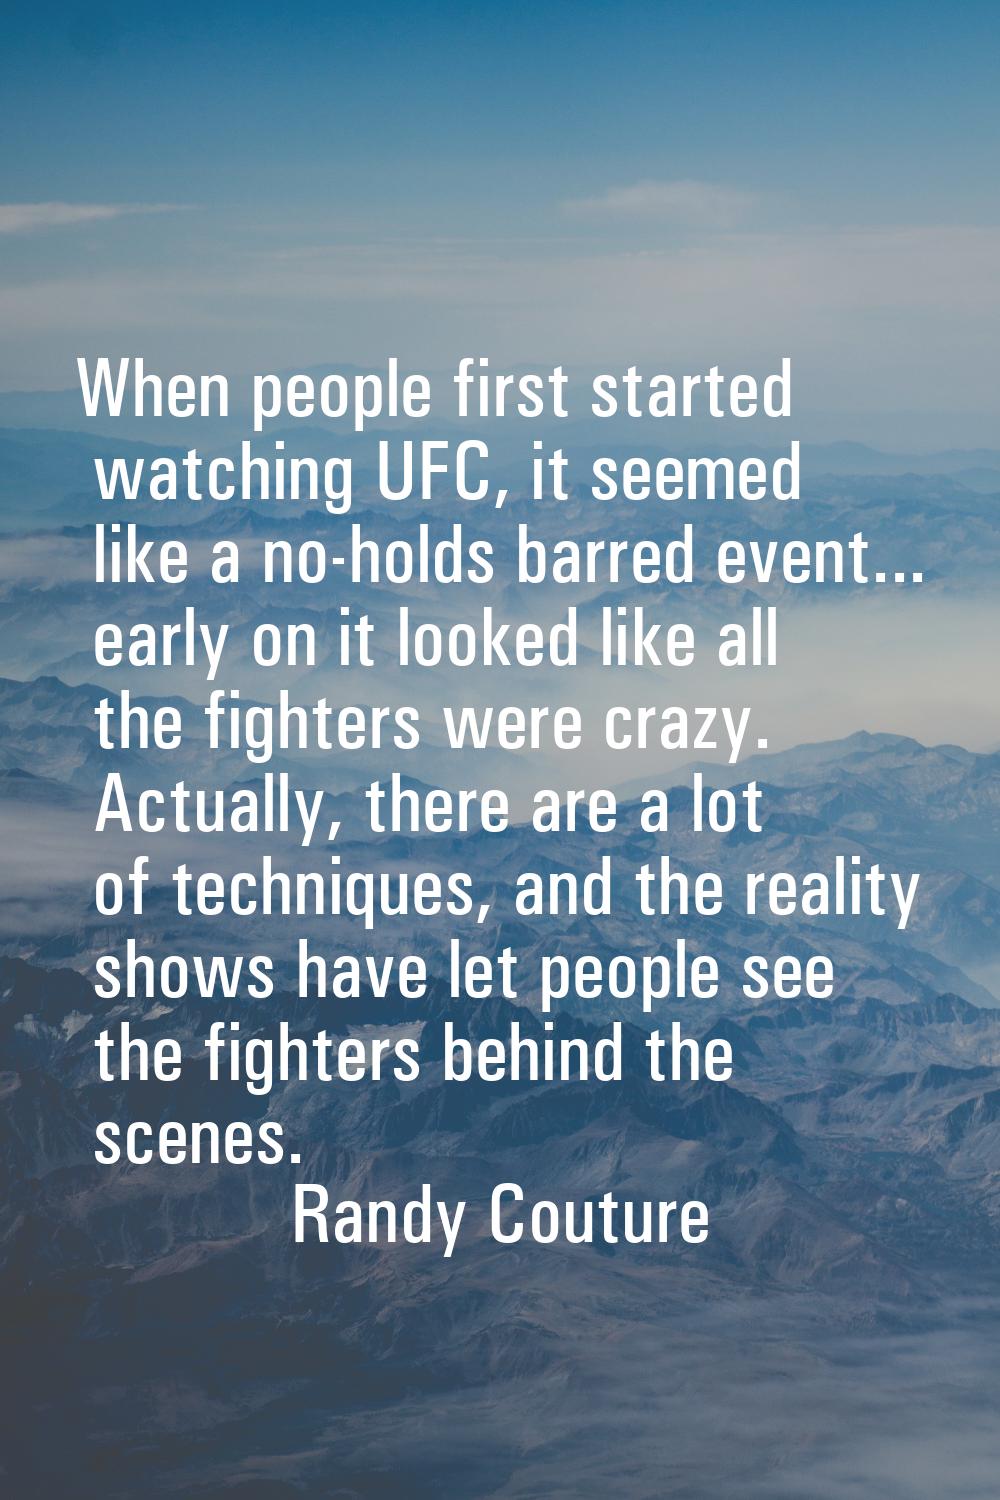 When people first started watching UFC, it seemed like a no-holds barred event... early on it looke